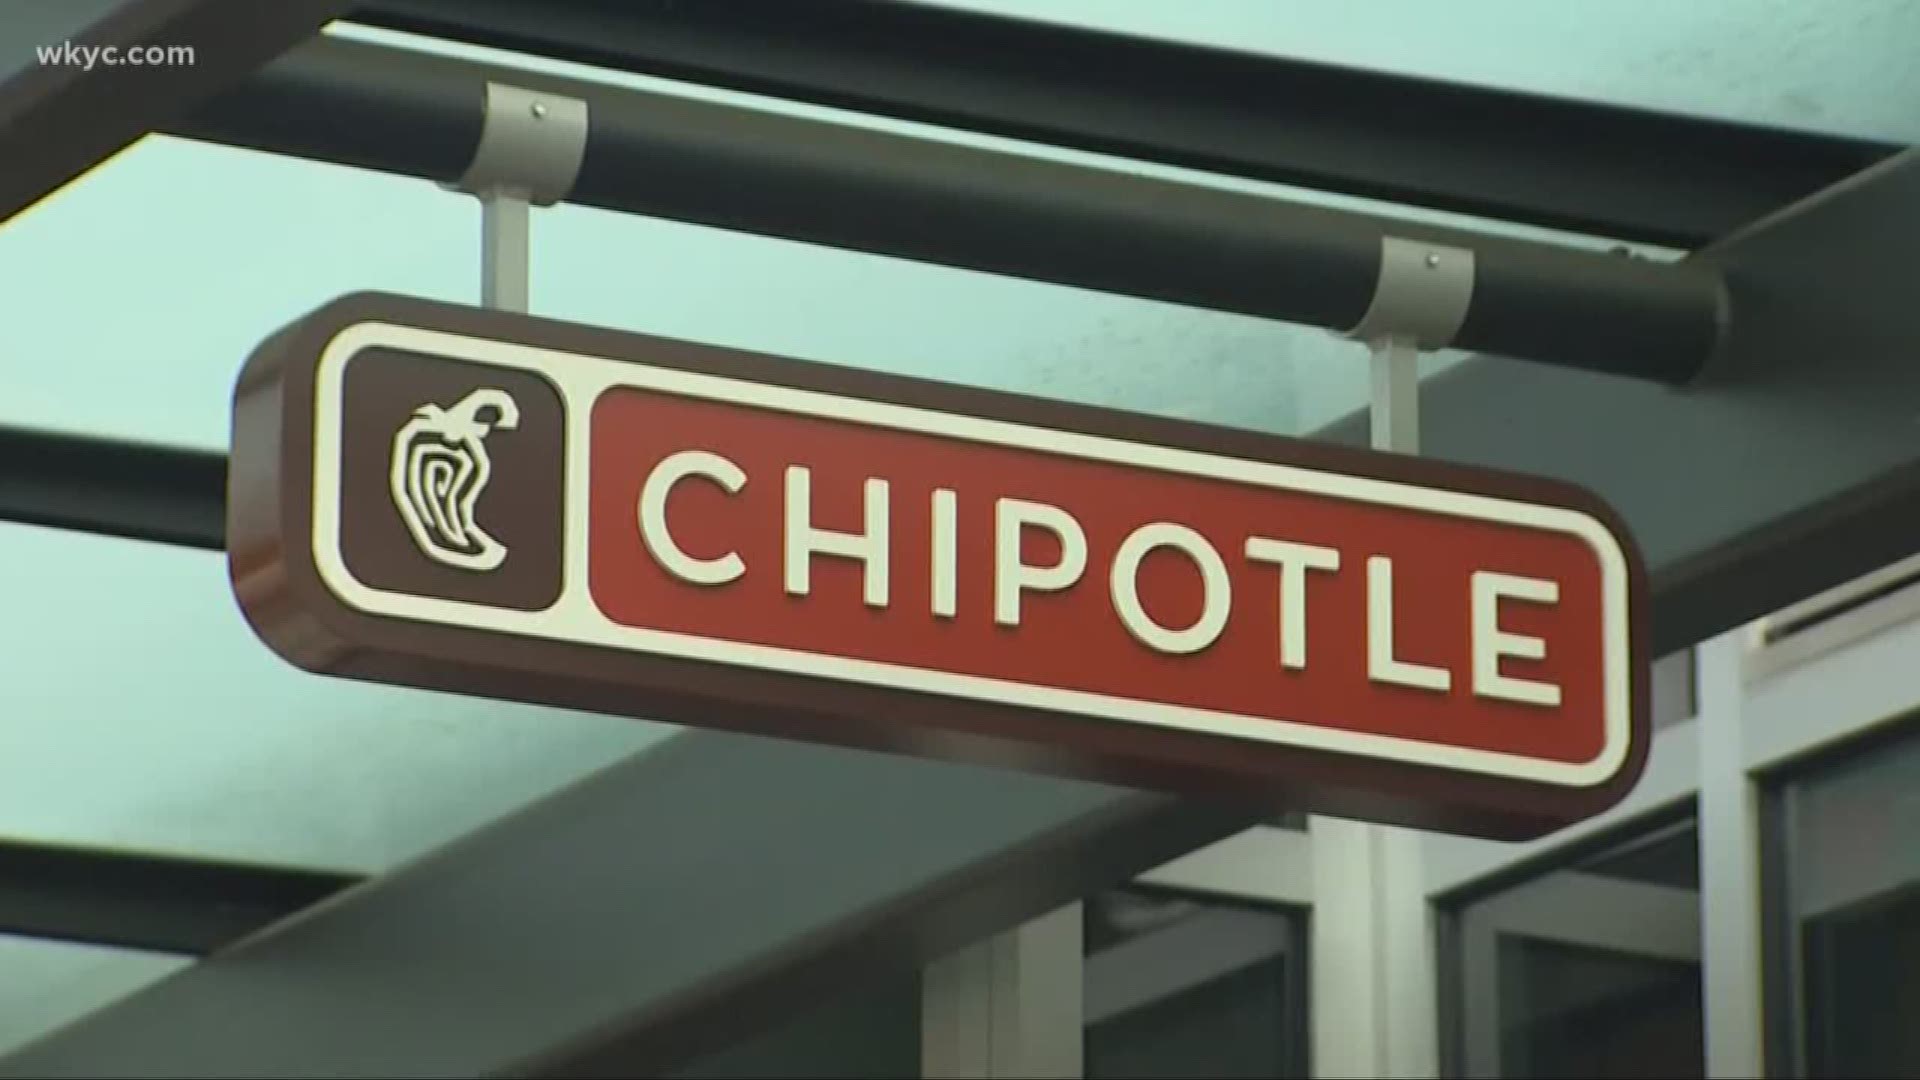 There are currently five restaurants in Ohio that offer “Chipotlanes.”